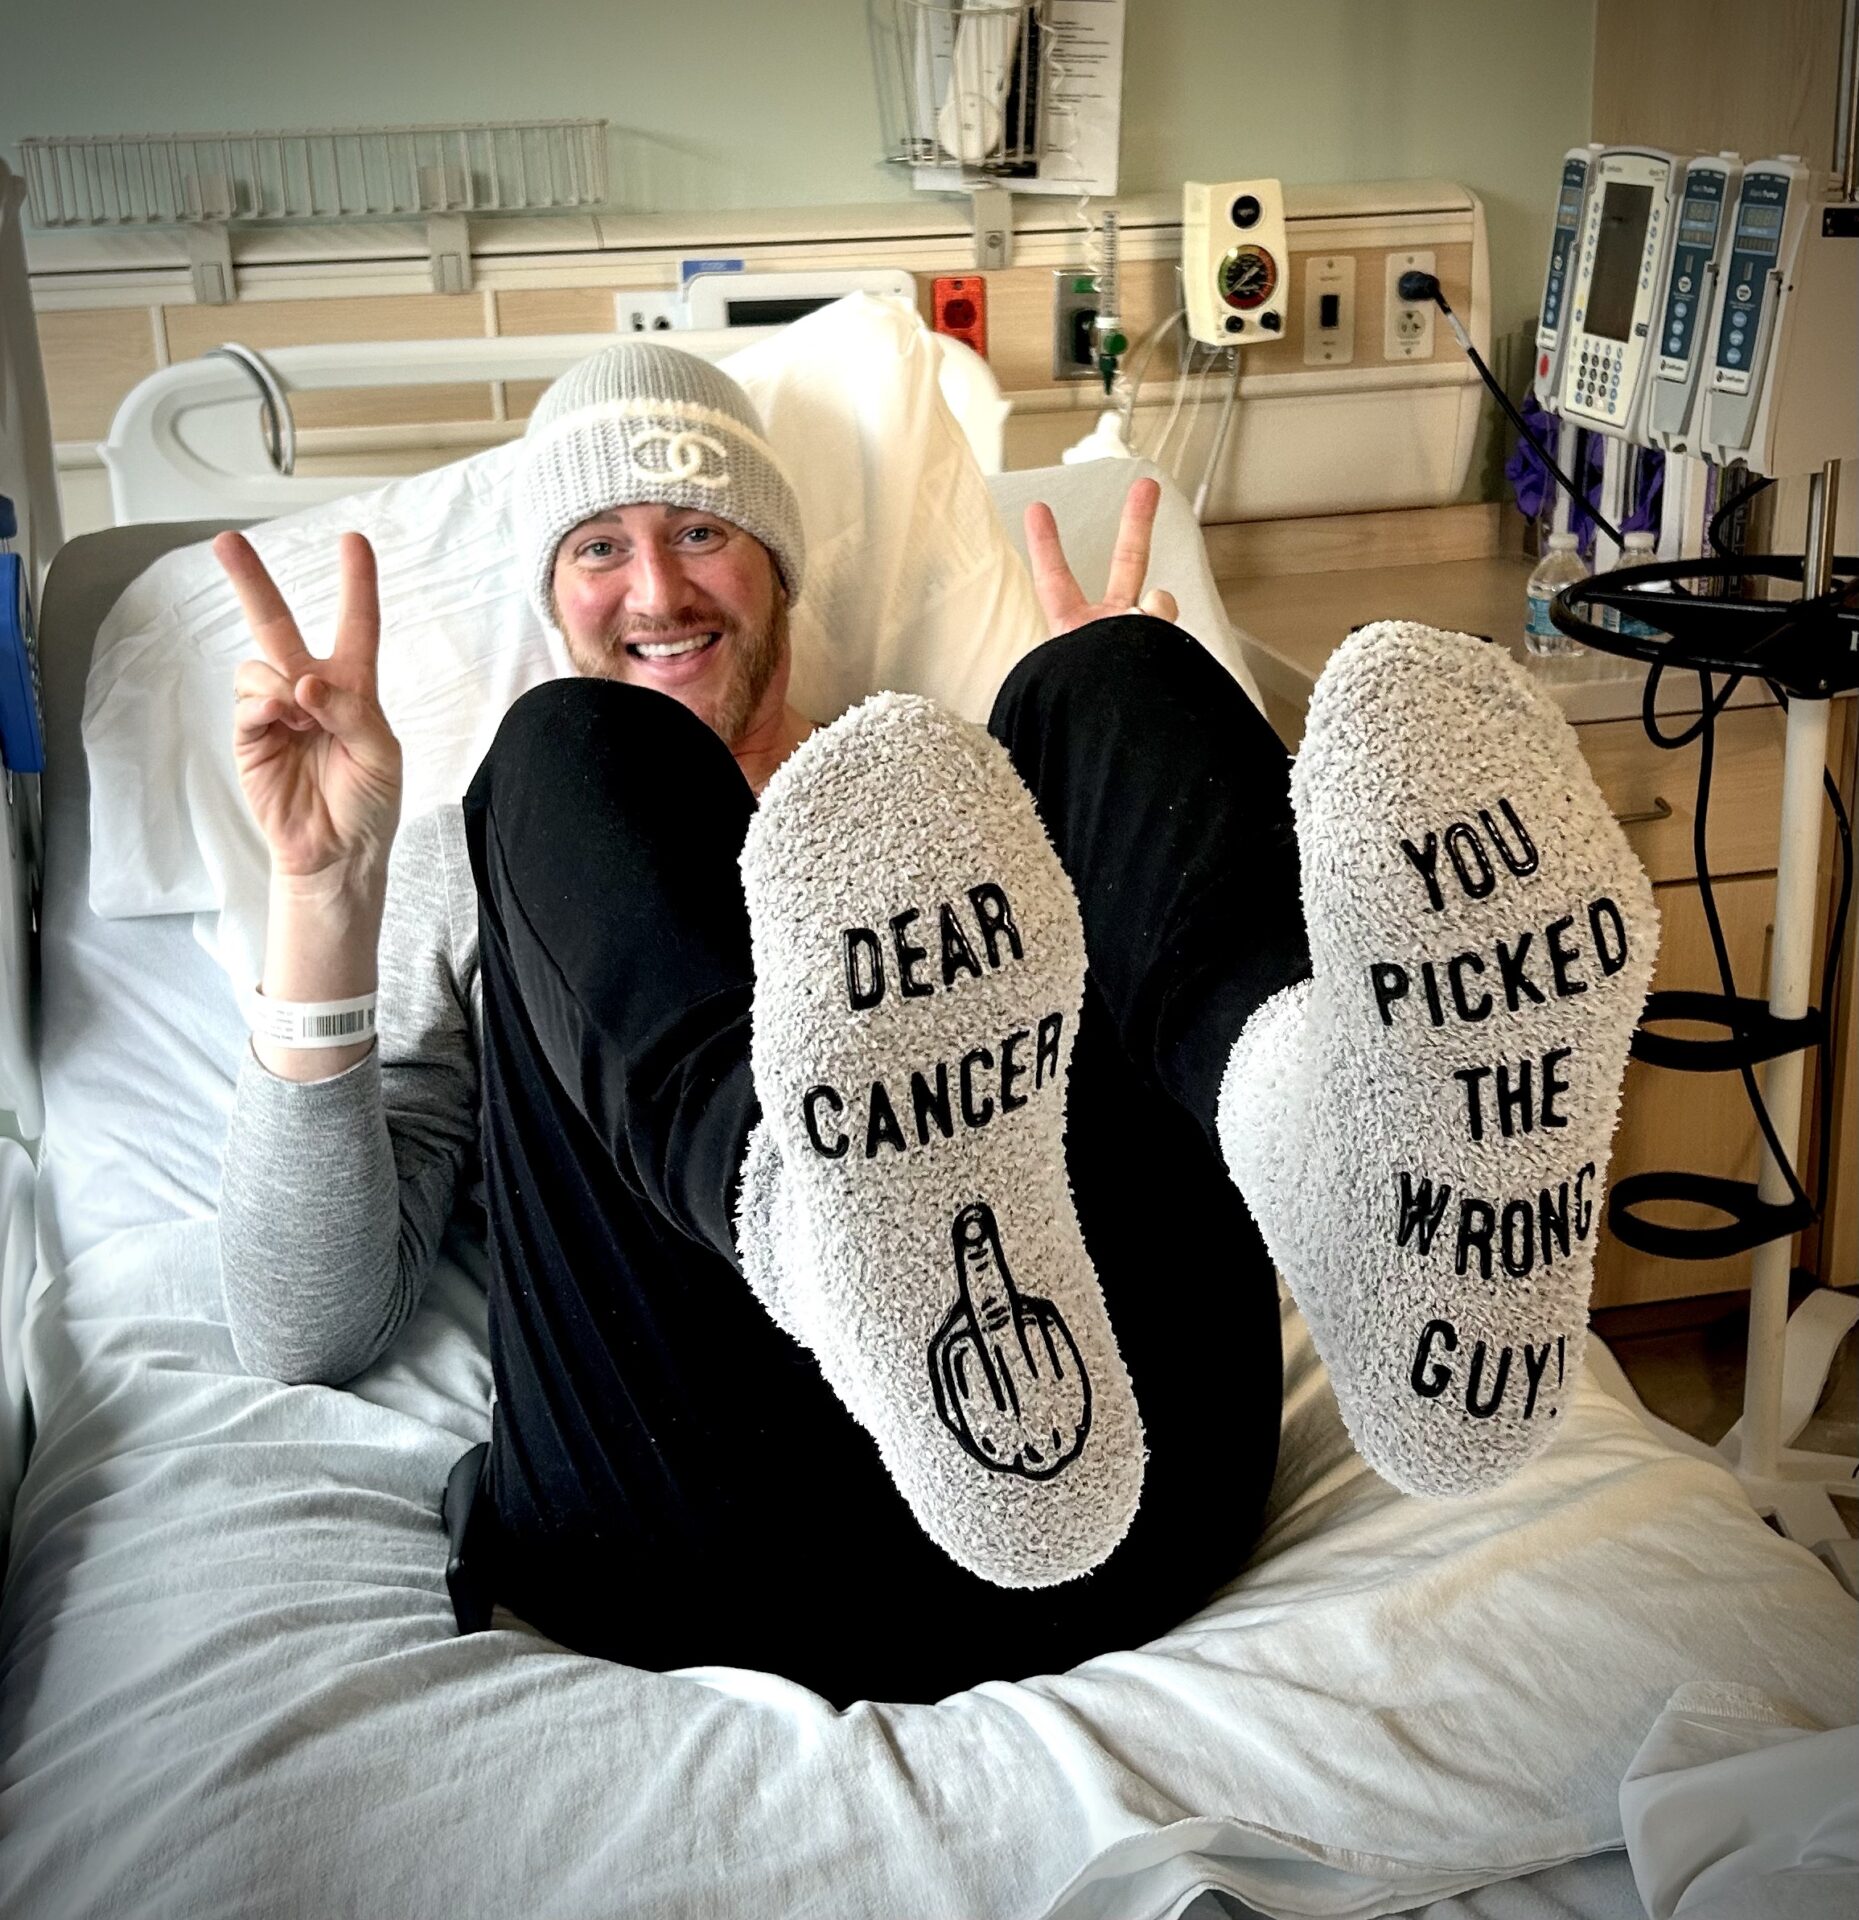 Kyle with his socks that say "Dear Cancer, you picked the wrong guy!"